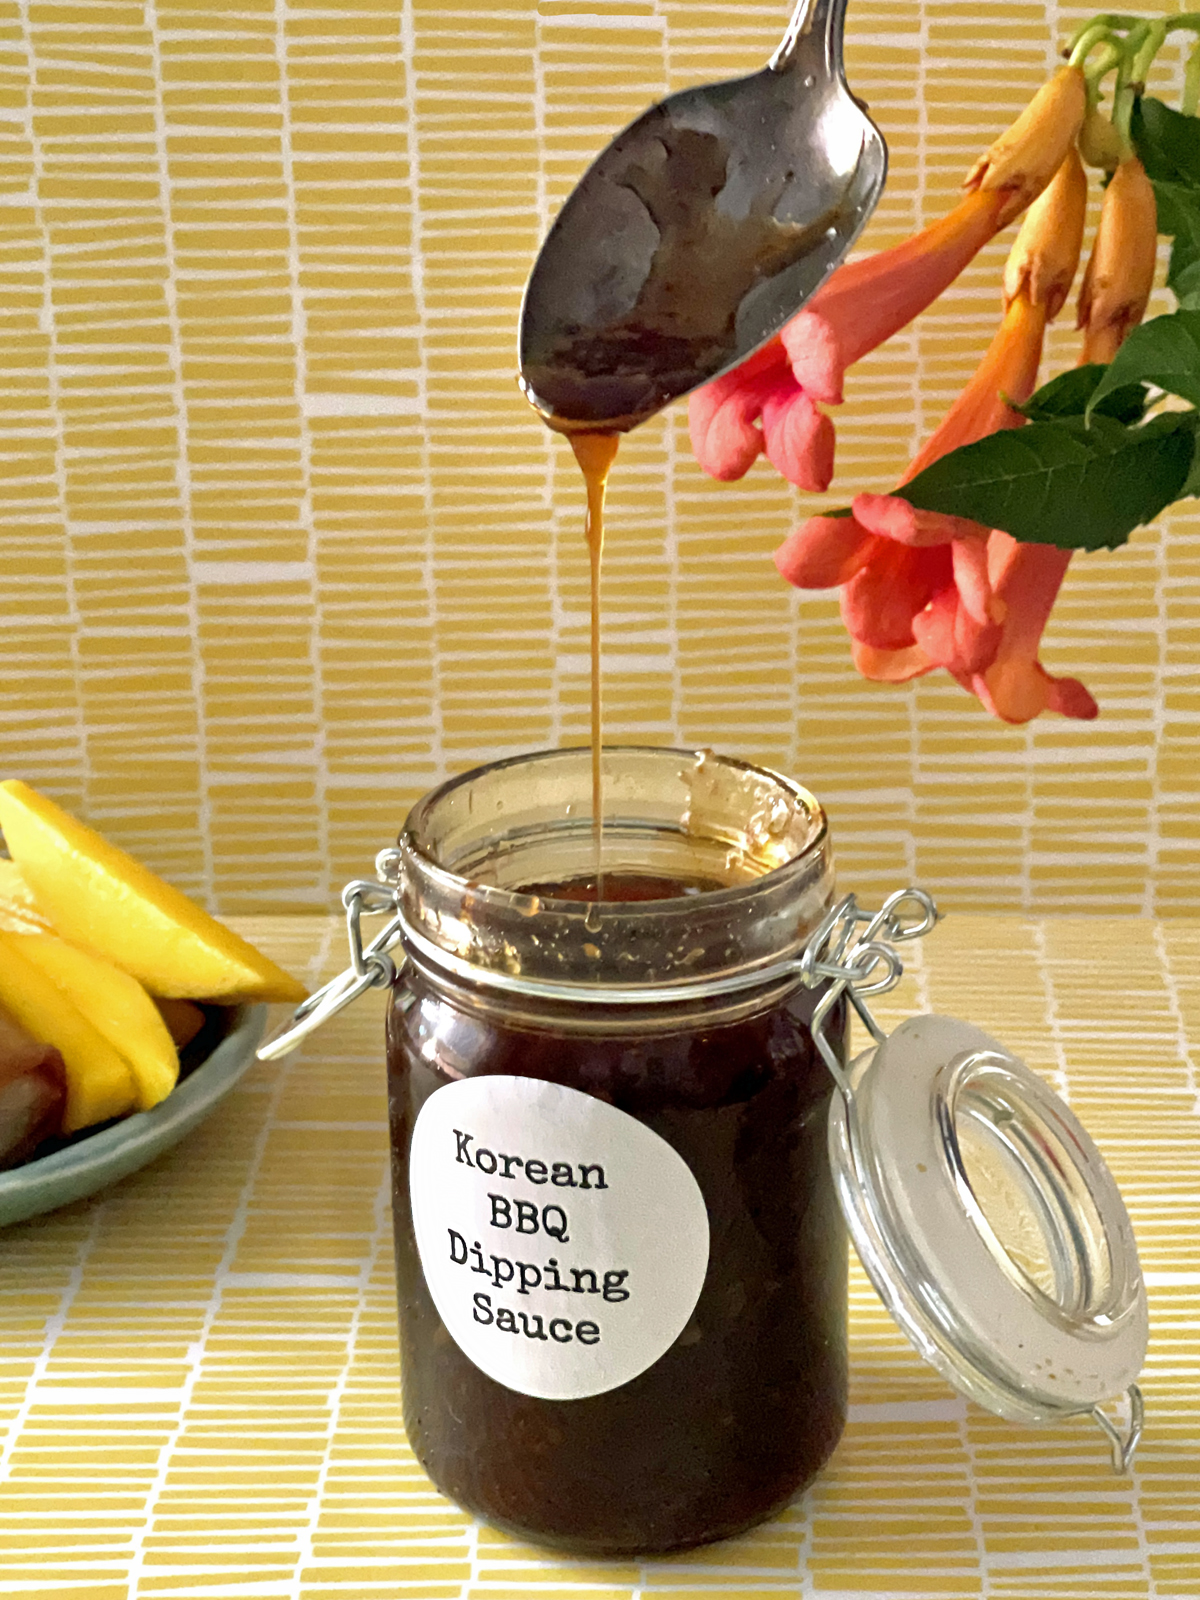 Bottle of Korean BBQ Dipping Sauce with sauce dripping from a spoon back into the jar.